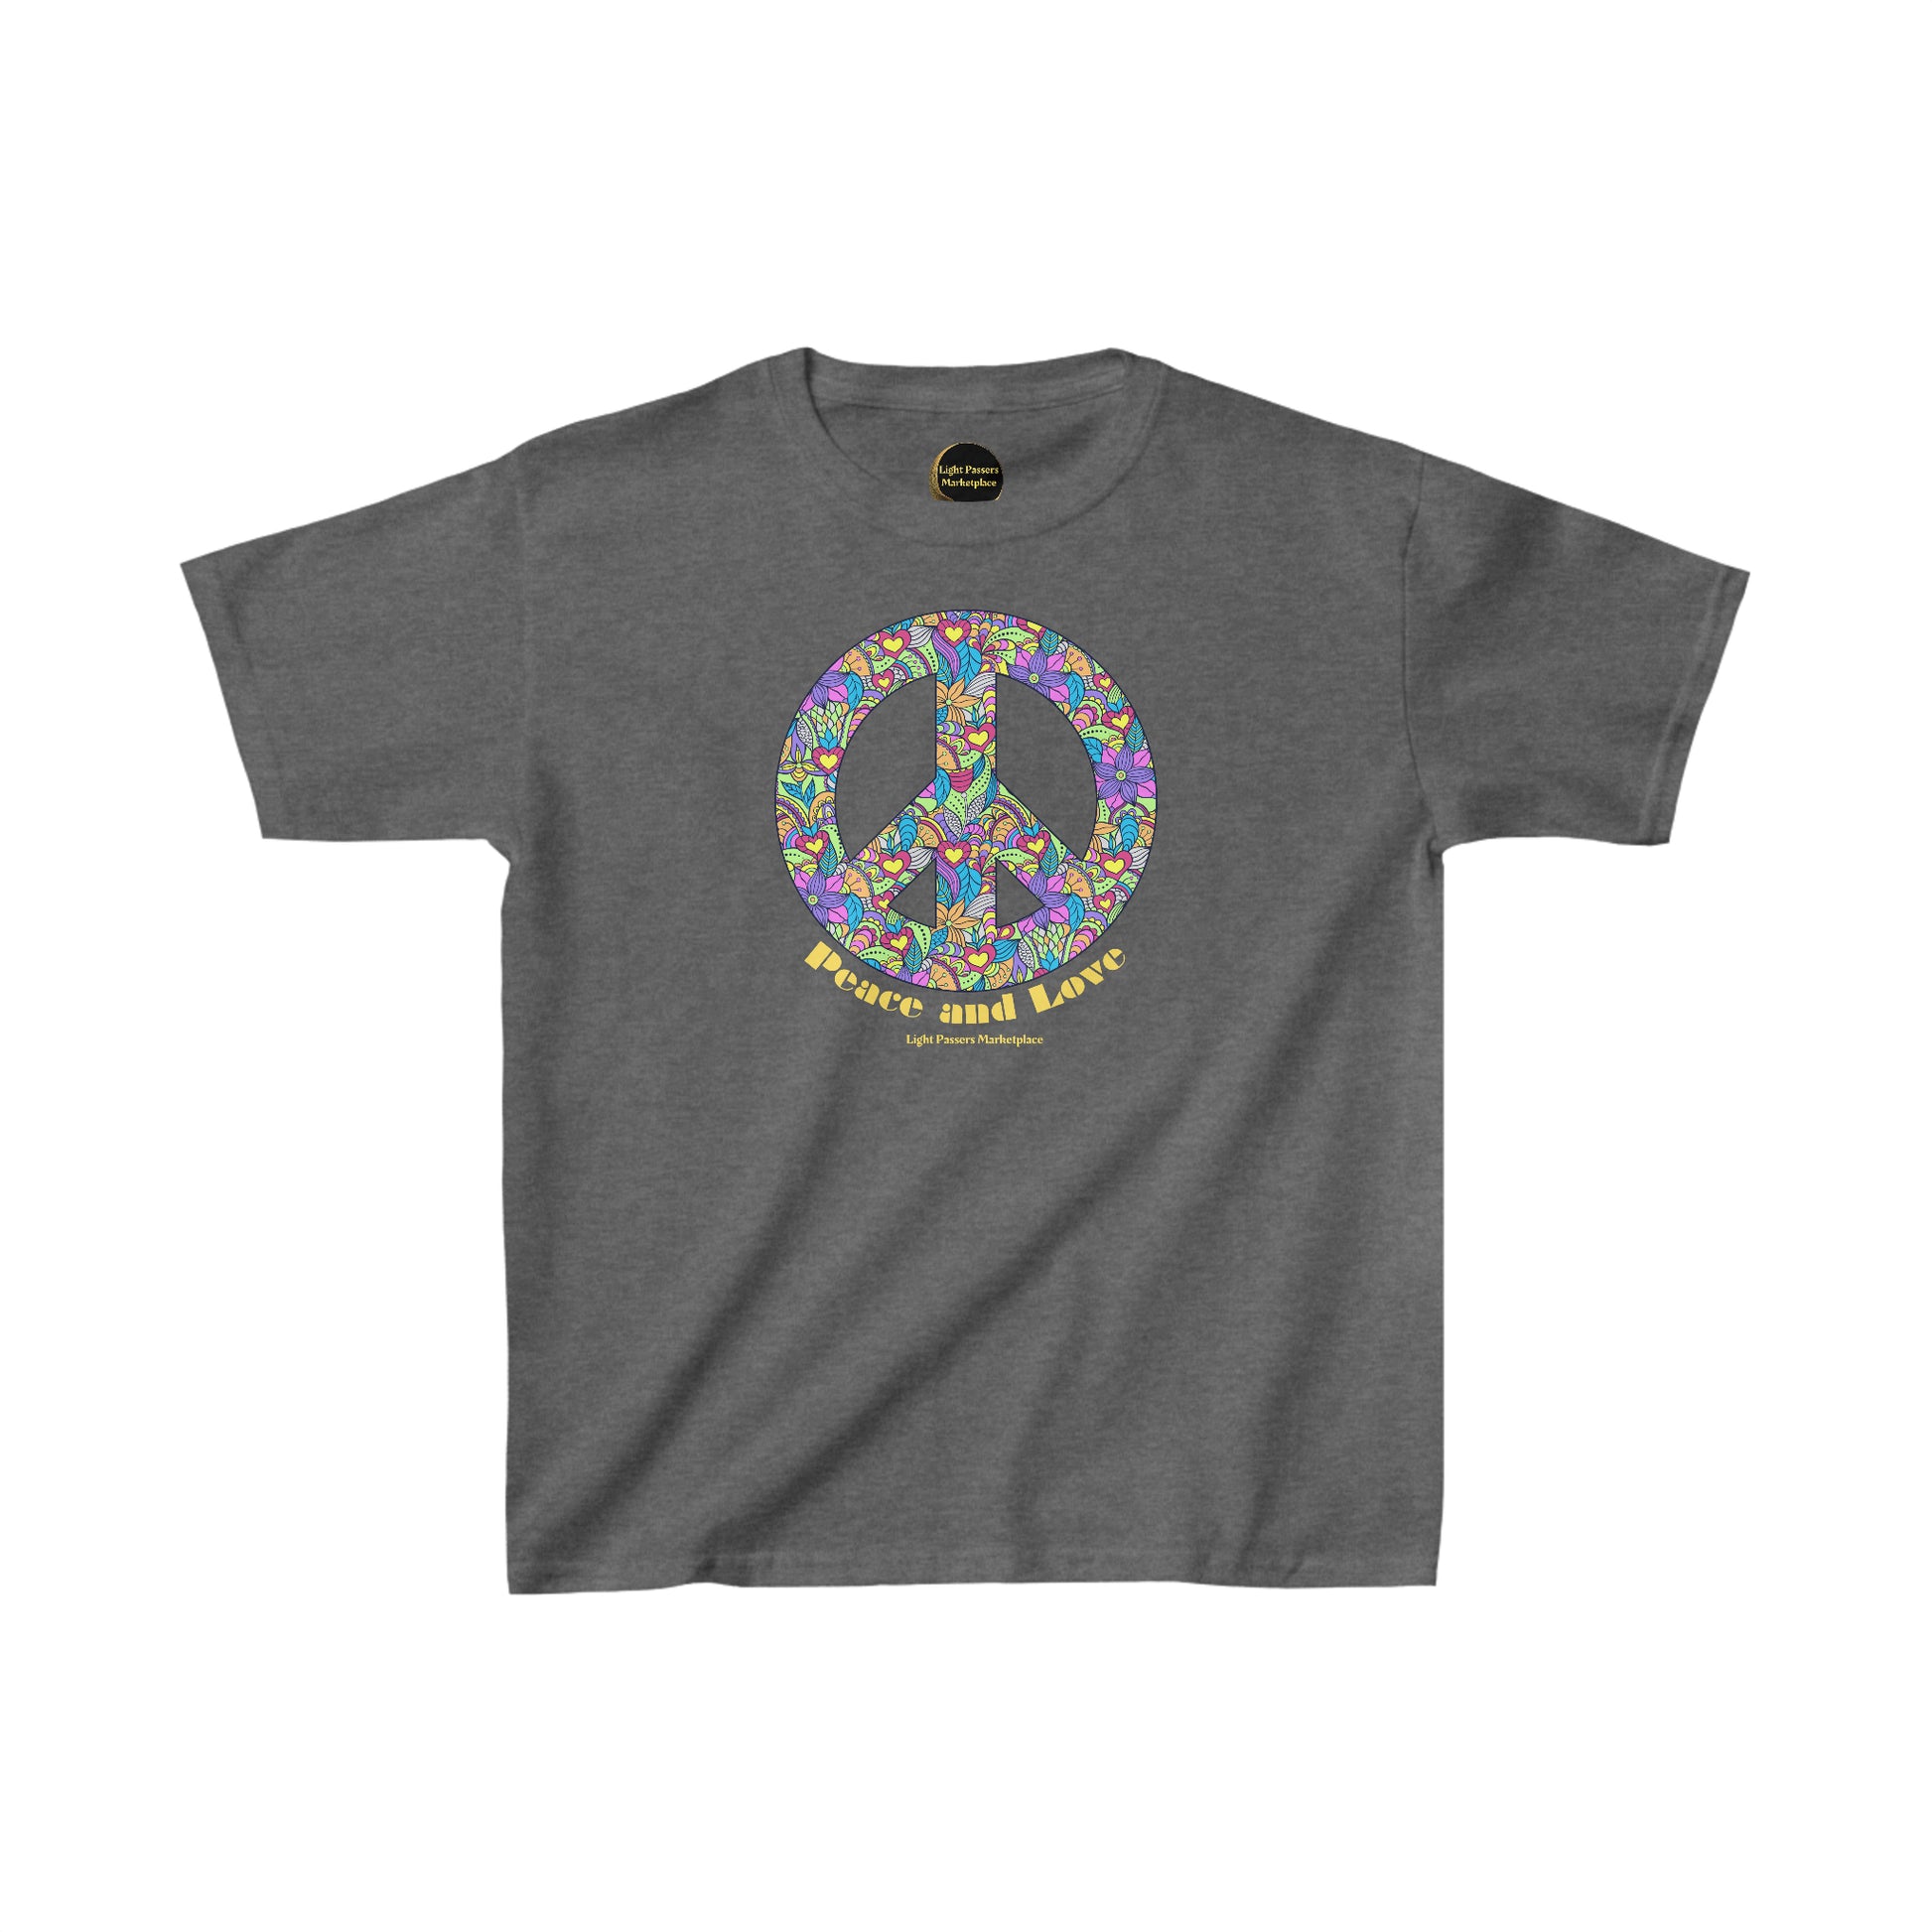 Youth heavy cotton t-shirt featuring a peace sign adorned with colorful flowers and hearts. Made of 100% cotton, durable twill tape shoulders, and ribbed collar for everyday comfort and style.